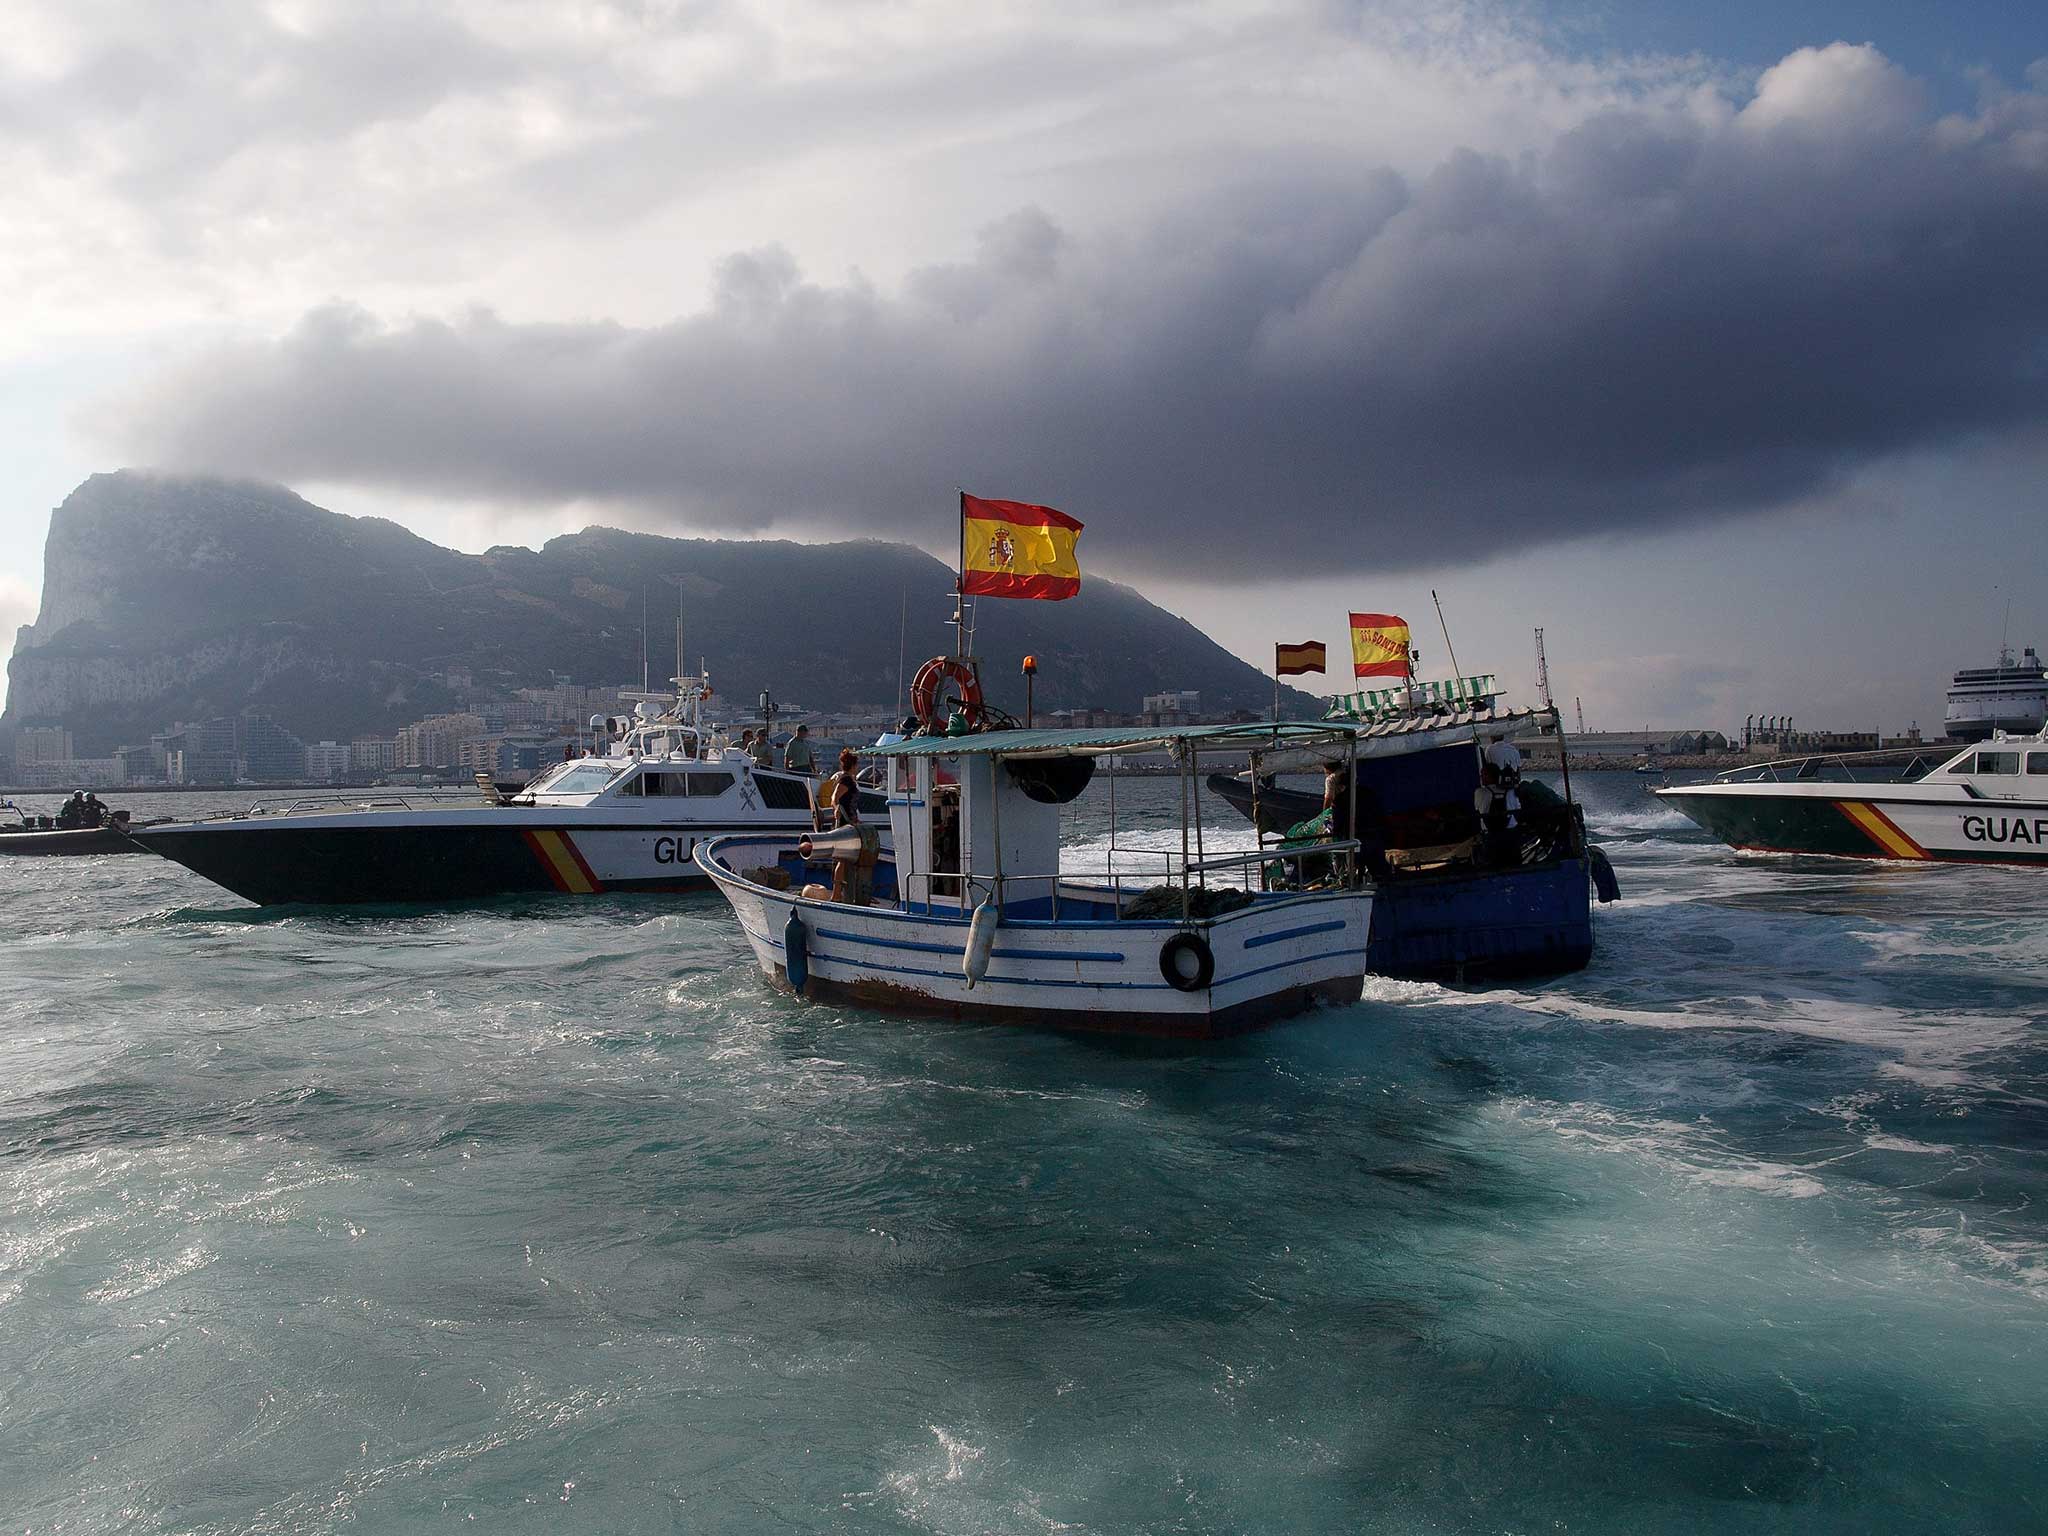 A Gibraltar police boat, Spanish Guardia Civil boat and Spanish fishing boats sail during a protest by Spanish fishermen in the sea near the Spain/Gibraltar border